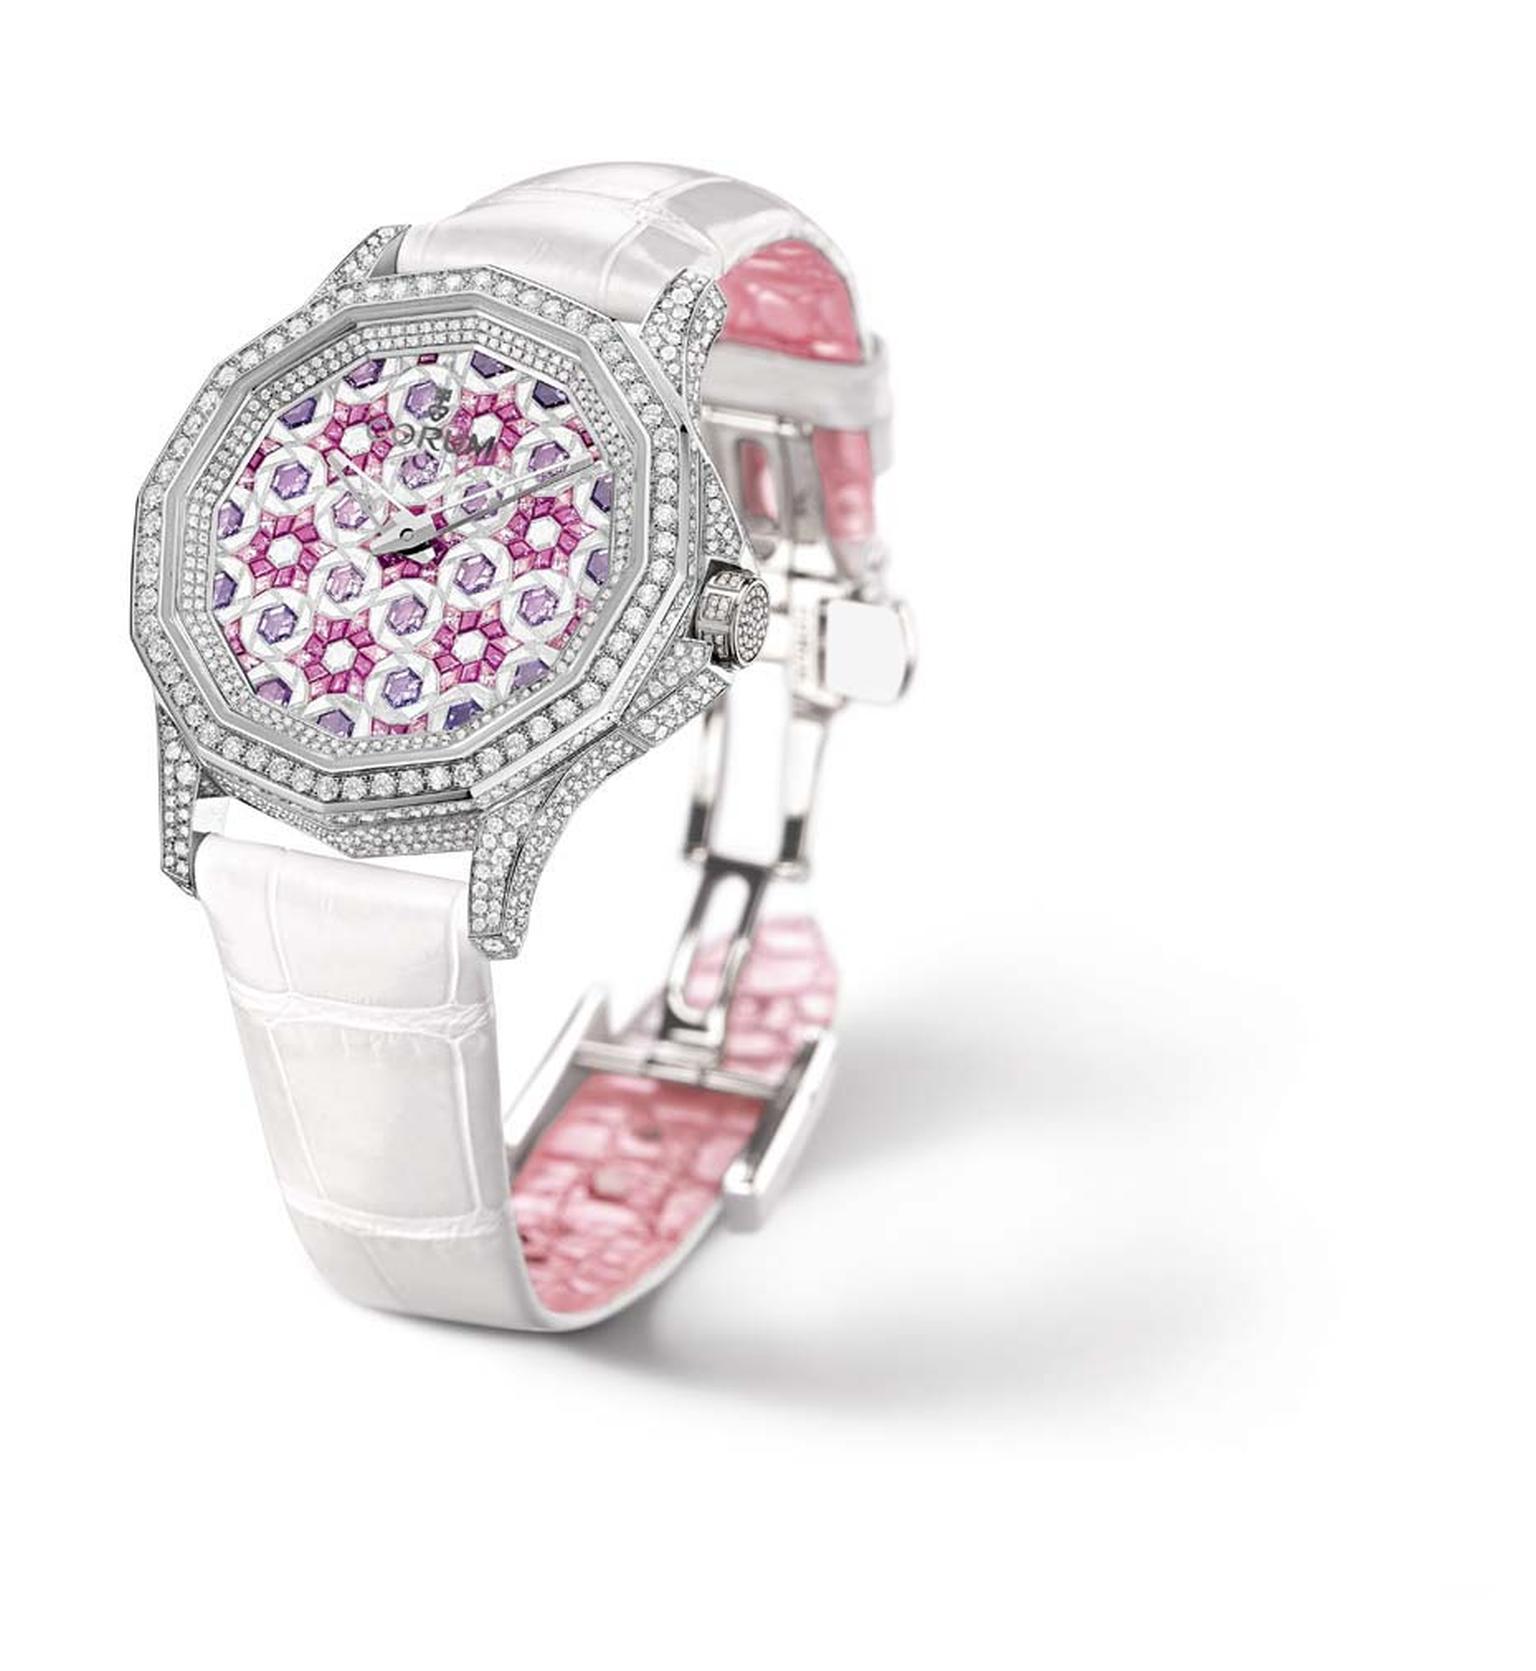 Corum 12-sided Admiral's Cup Legend 38 for women is adorned diamonds and pink and purple sapphires, set to create a tightly packed geometric floral motif